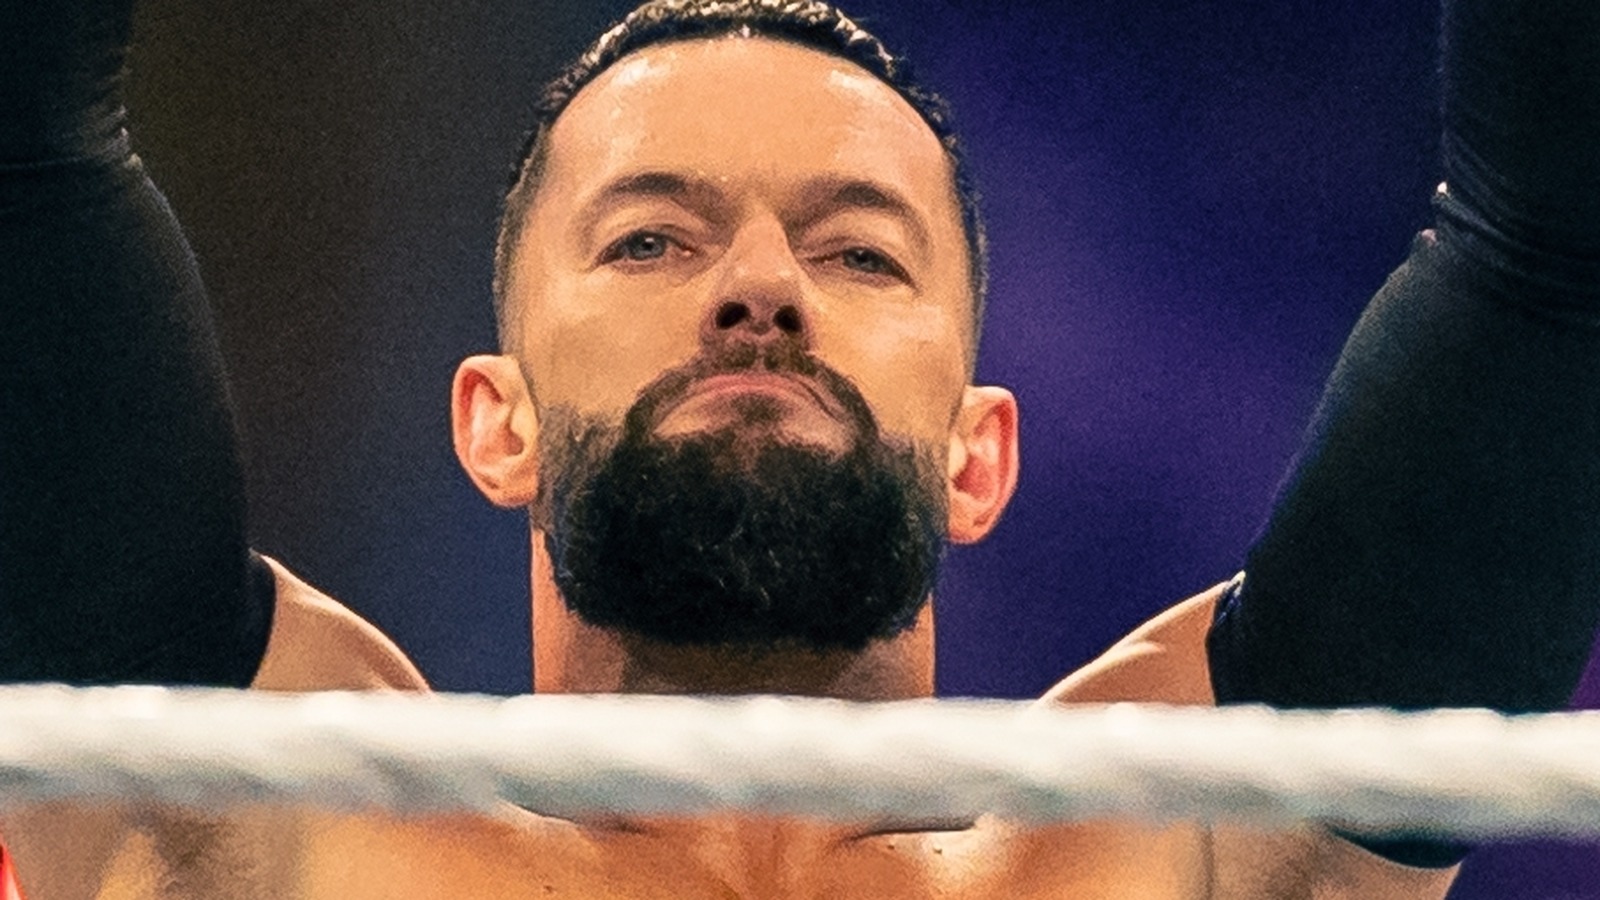 Finn Balor Busted Open During WWE WrestleMania Match, Received An Injection And Staples At Ringside